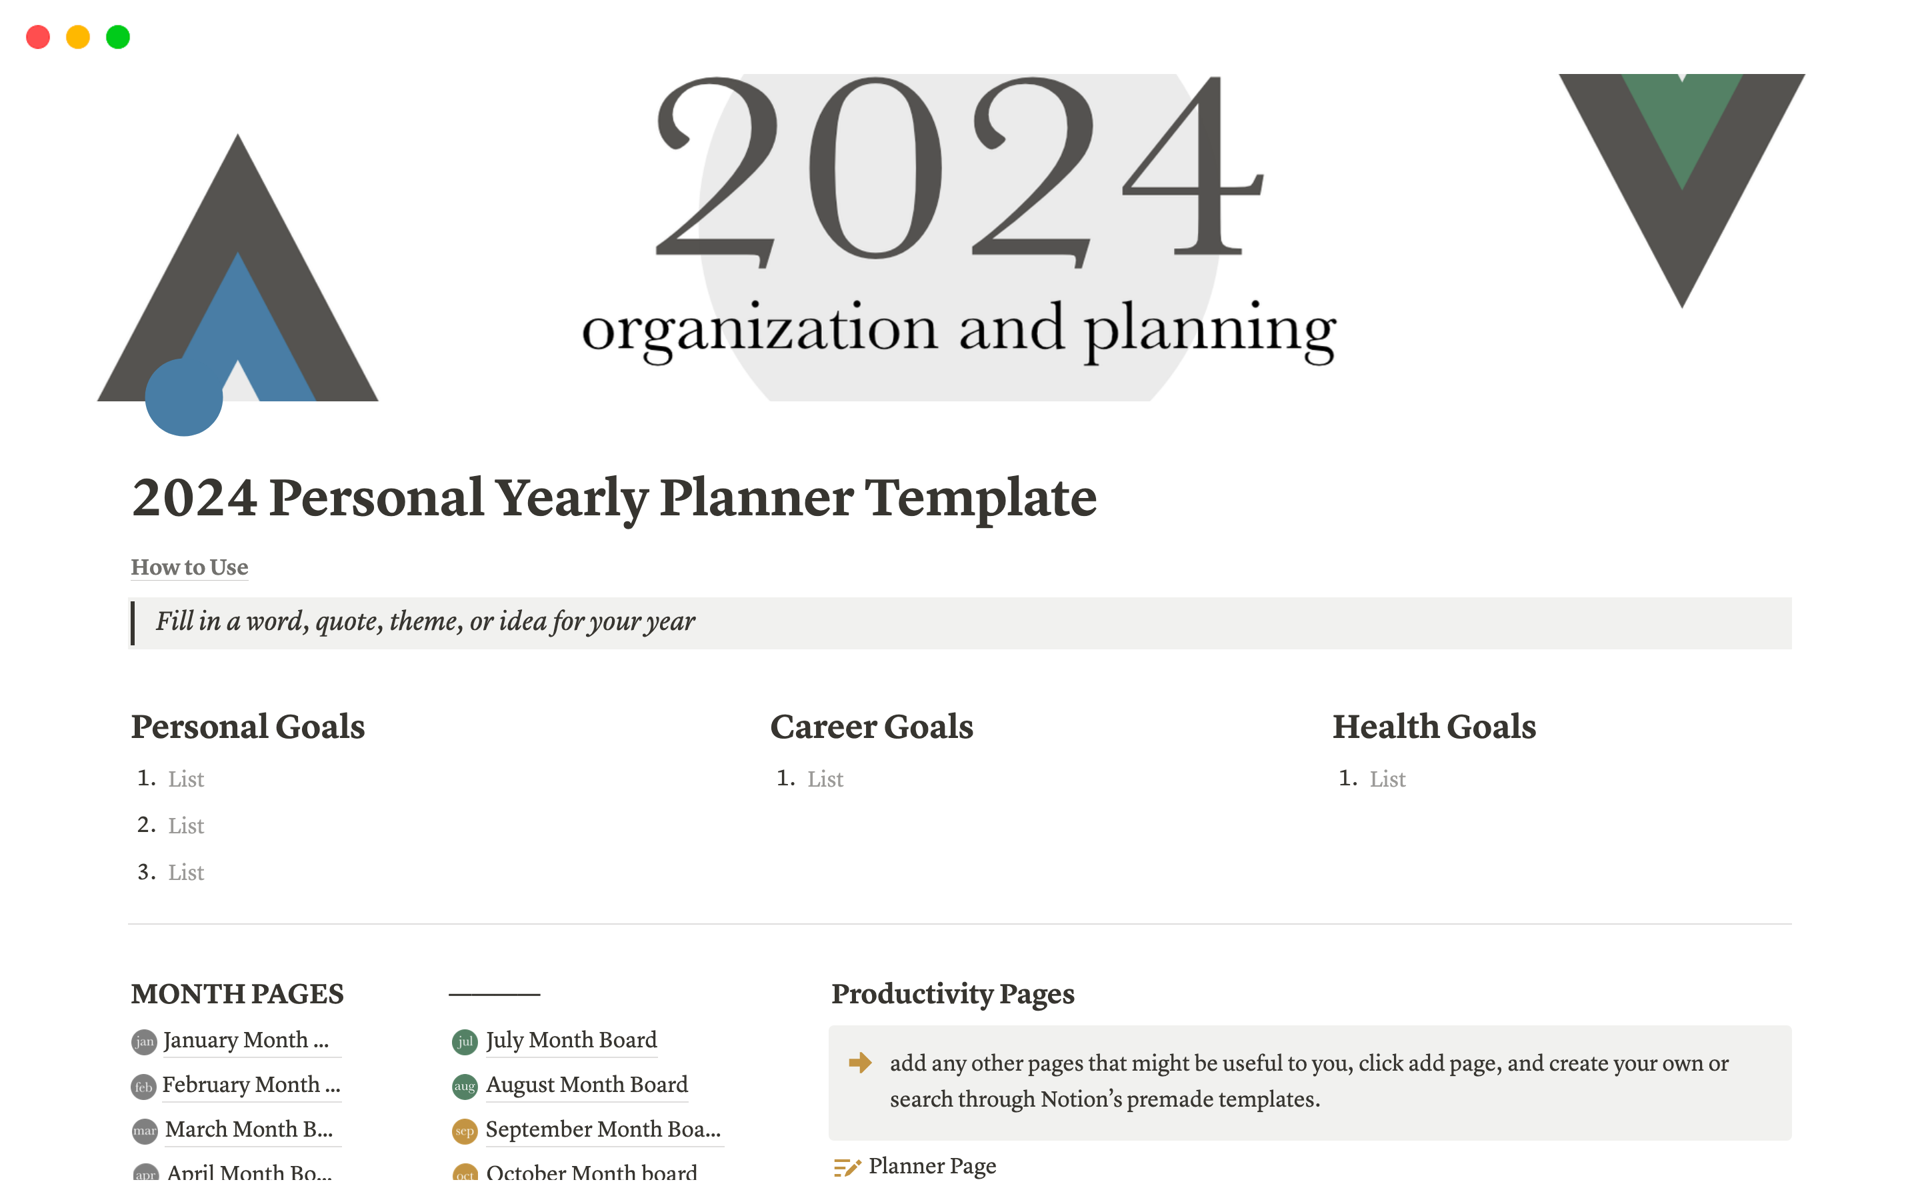 A template preview for 2024 Personal Yearly Planner